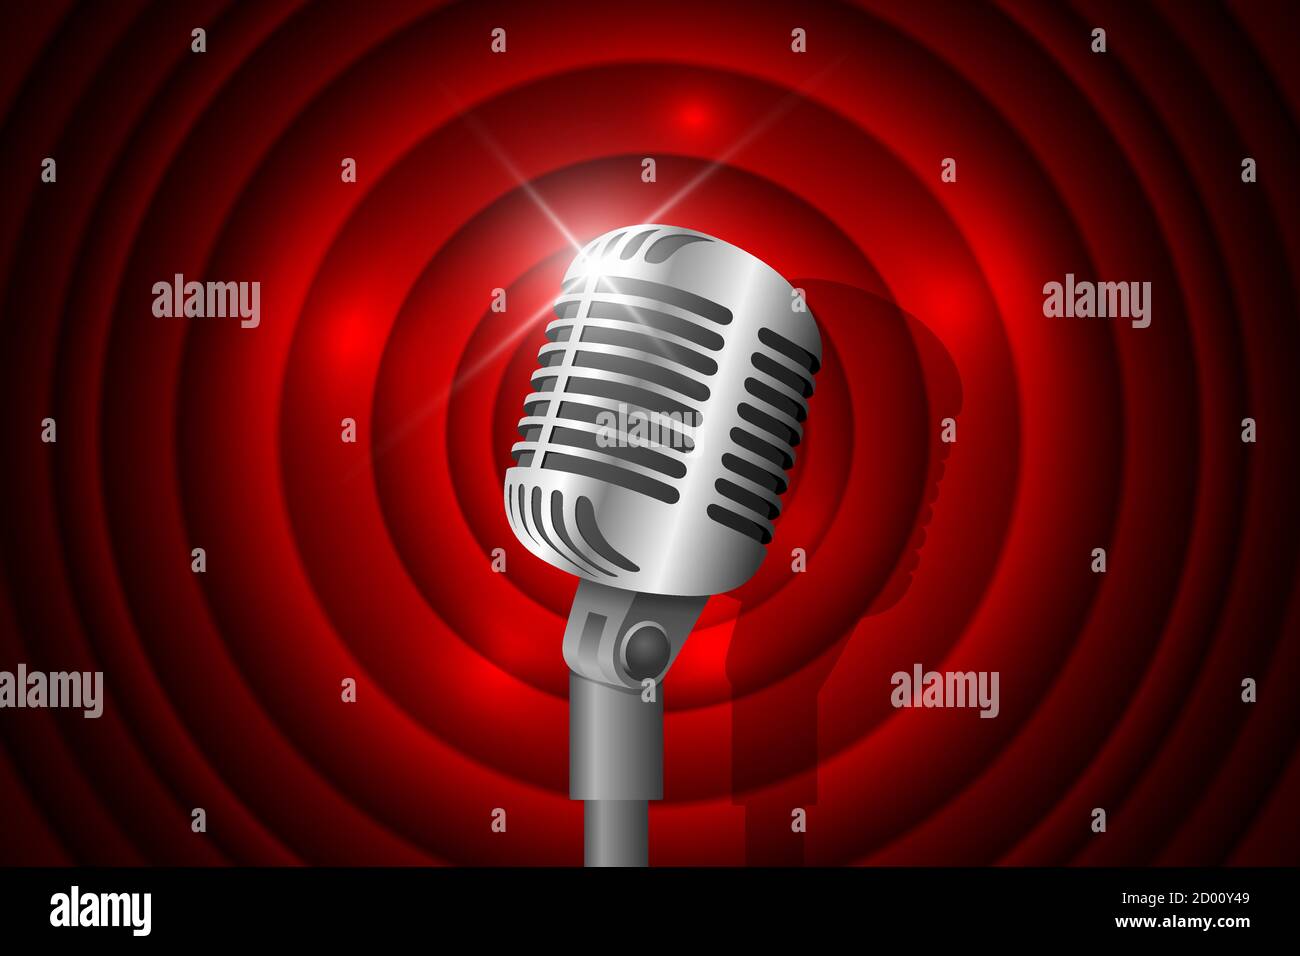 Silver metal vintage microphone illuminated and red circle background. Retro music concept. Mic on empty theatre stage. Stand up comedy night show. Karaoke party vector eps art illustration Stock Vector